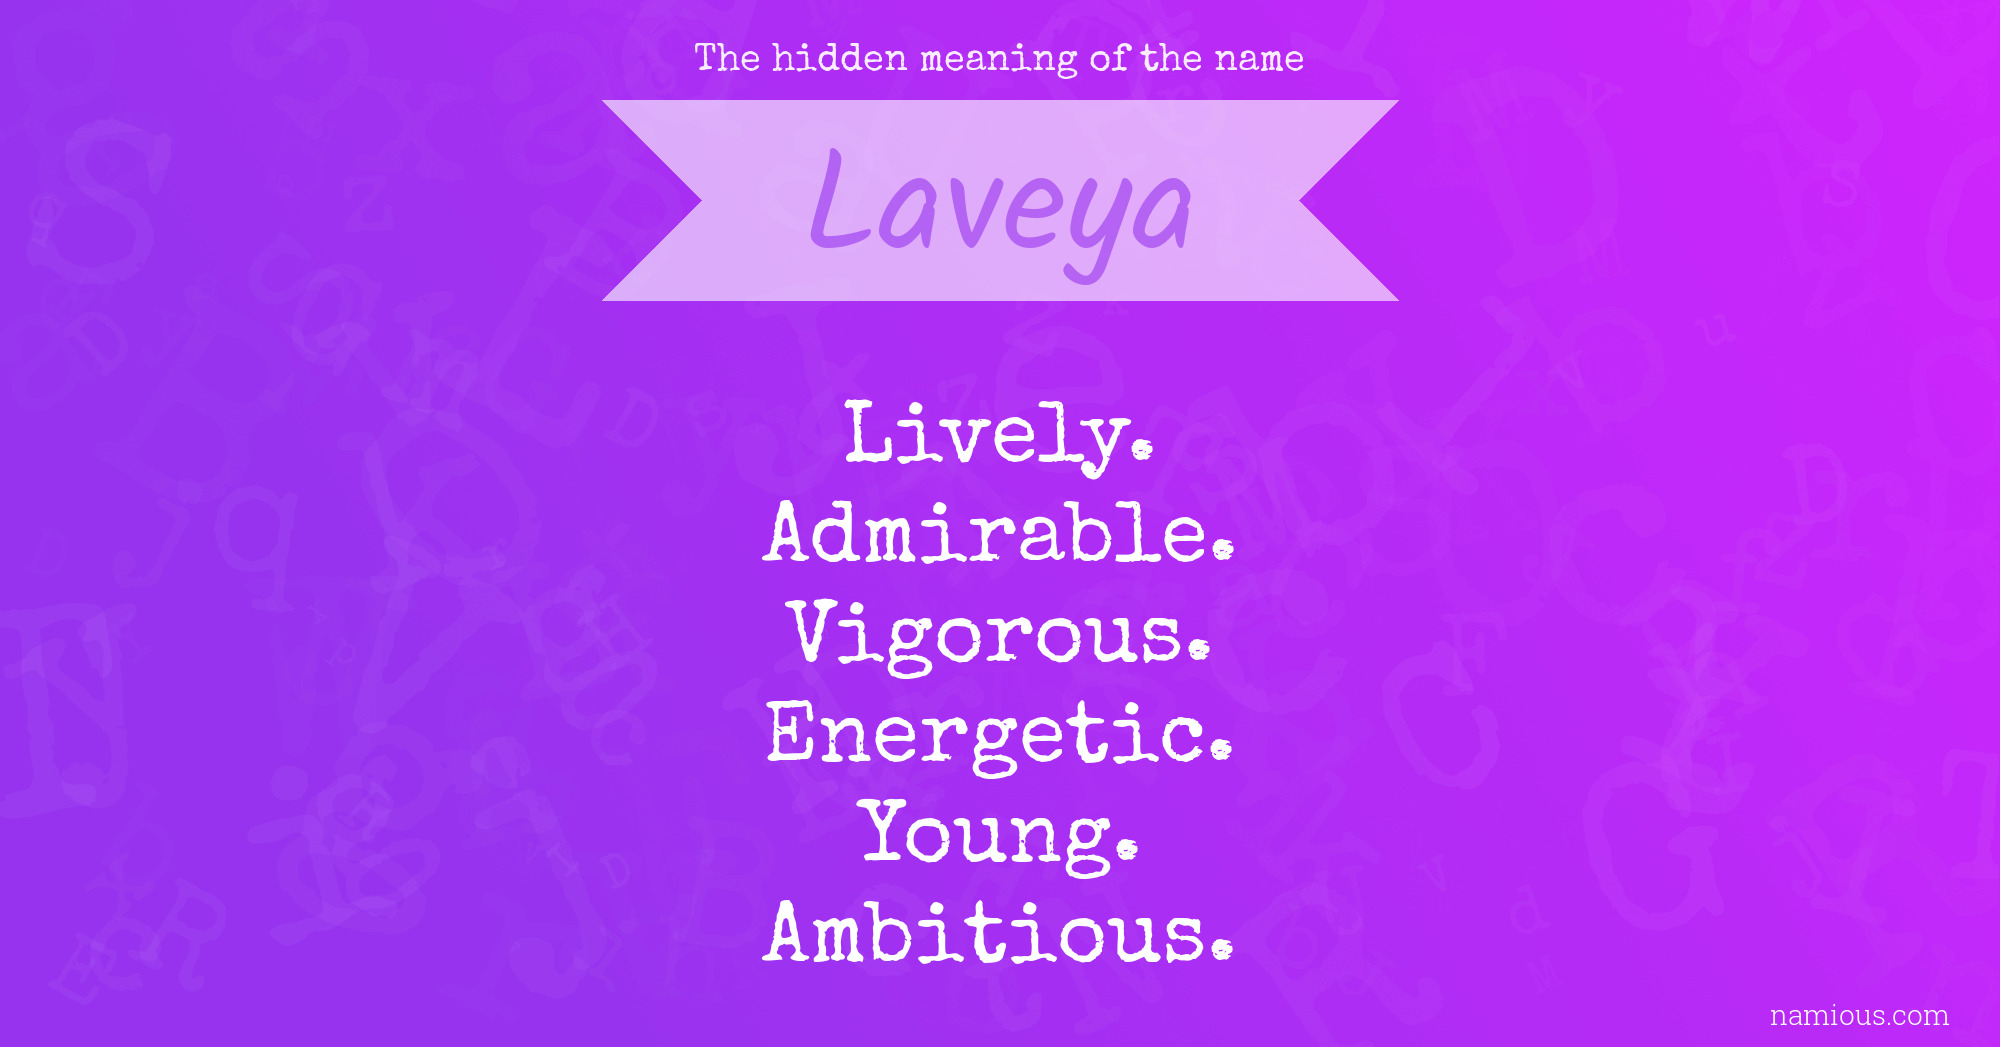 The hidden meaning of the name Laveya